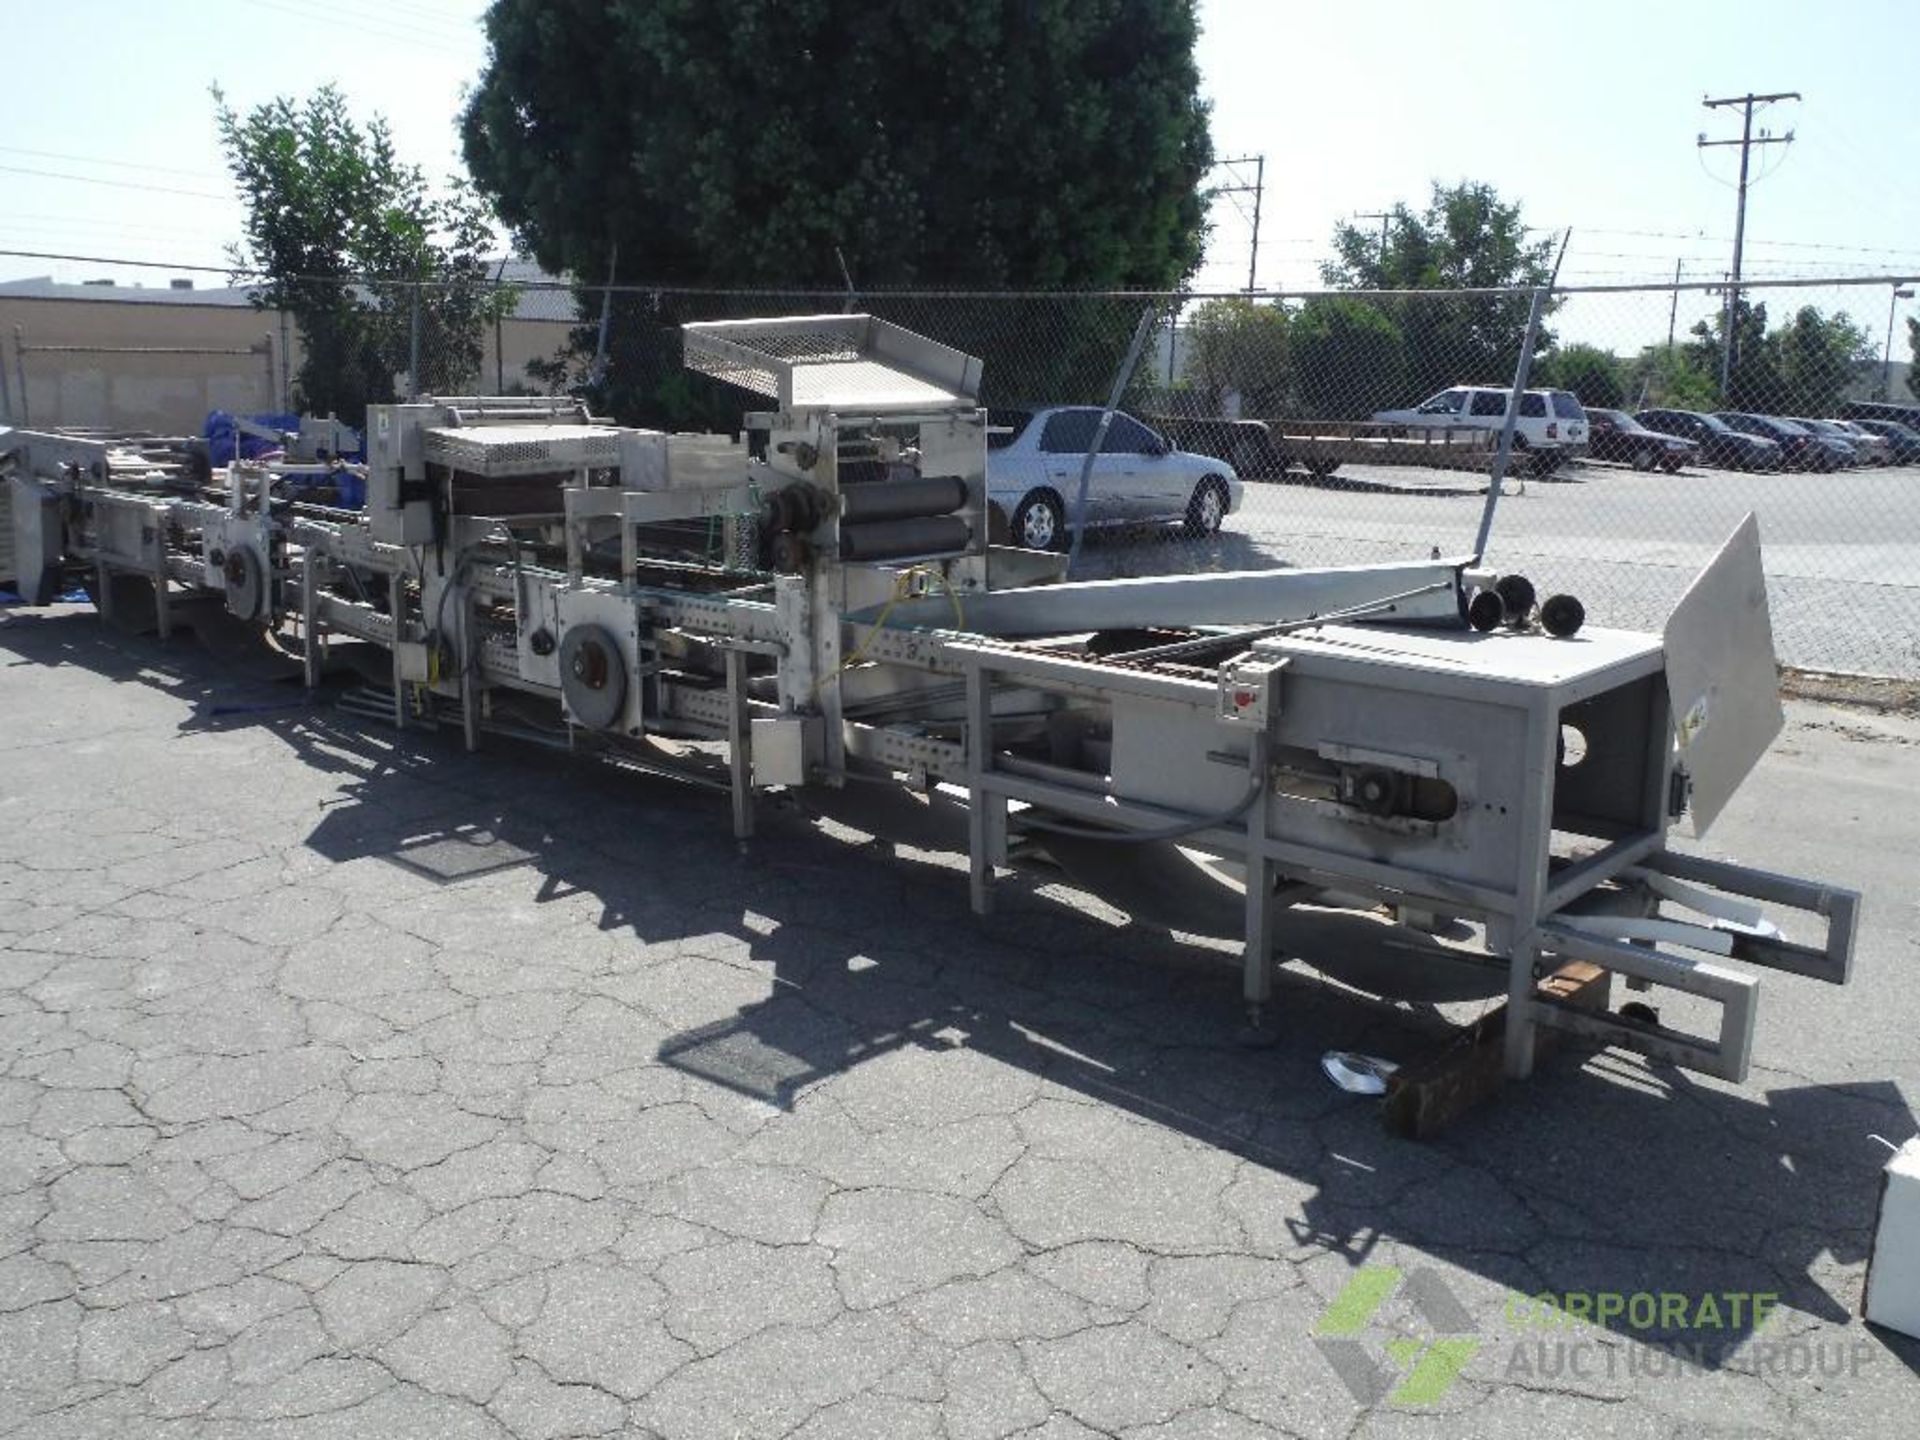 Colborne series 45 pie line, 4,5,6,9,10,11,12 in. pies, removed from facility, stored outdoors, with